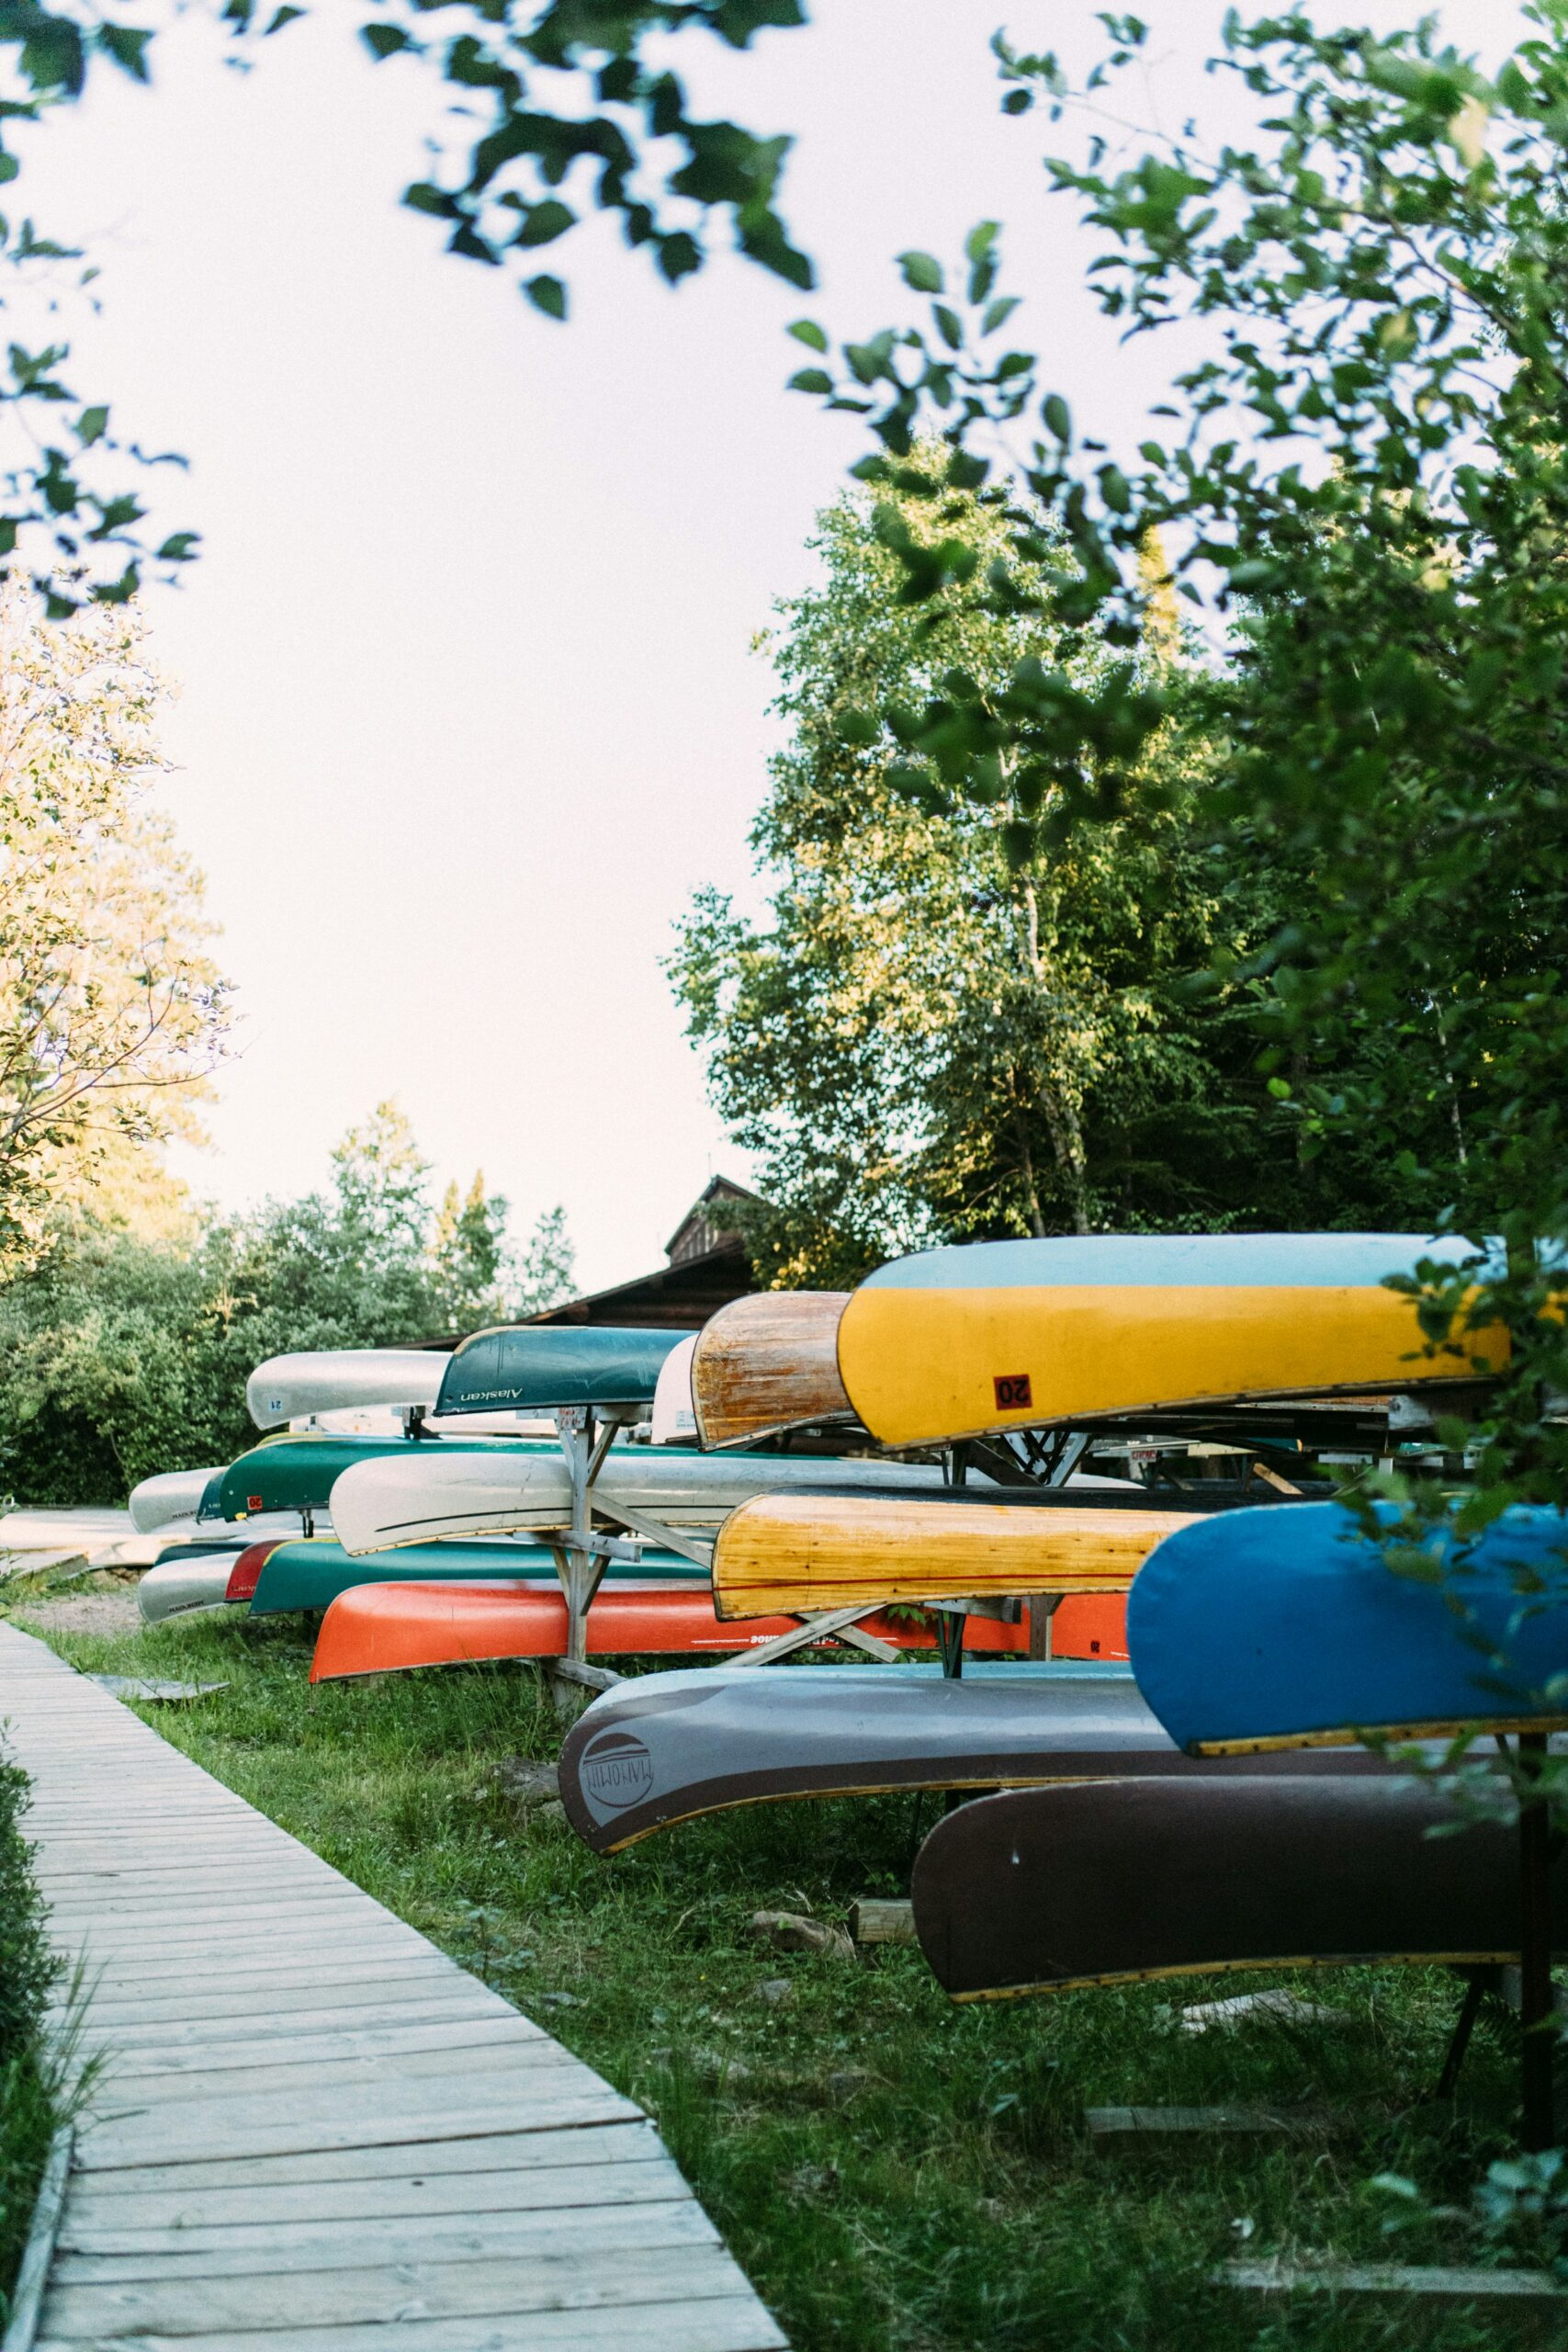 Kayaks and Summer Nutrition